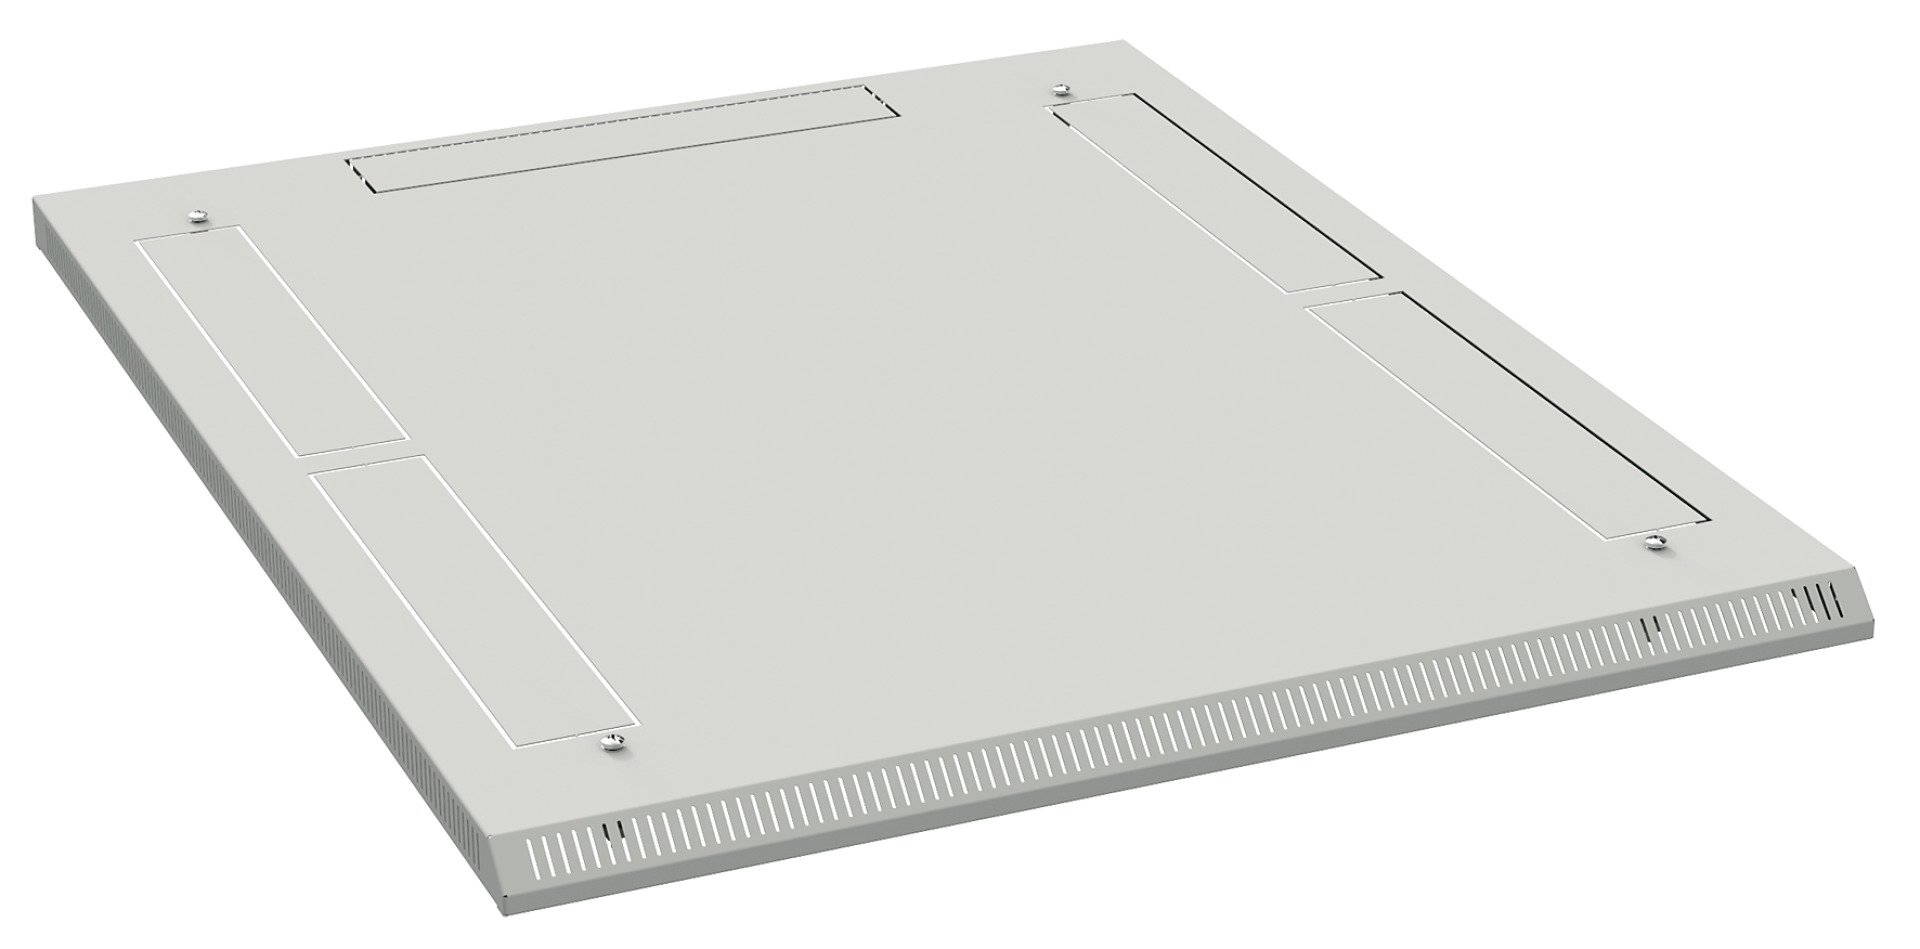 Additional Roof H=40 mm, 600x600 mm, RAL9005, for Cabinet Series PRO